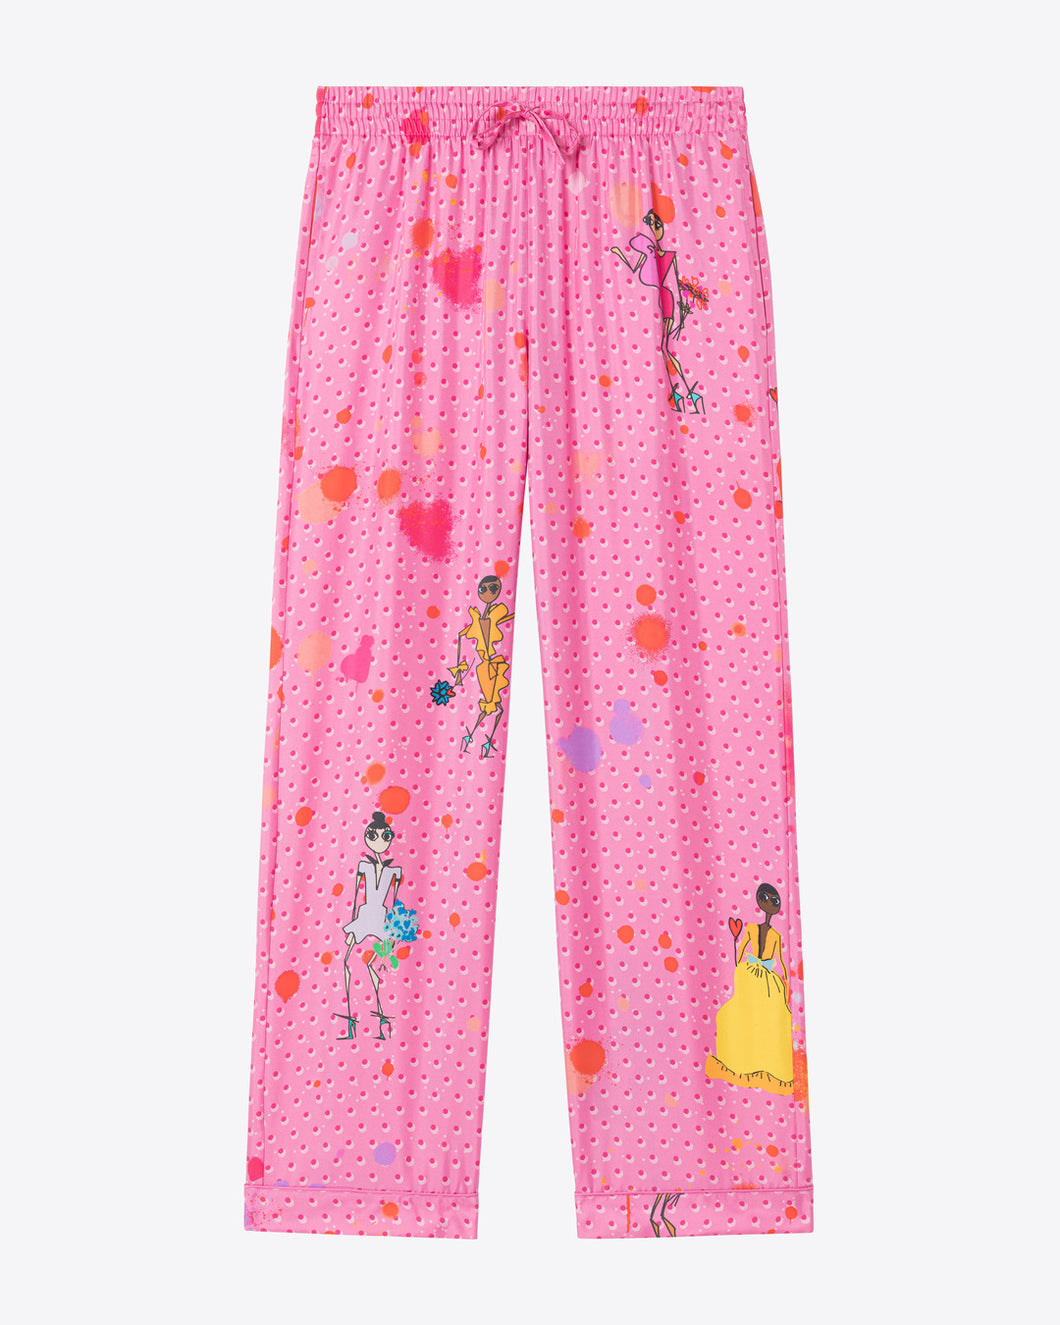 SILK-TWILL TROUSERS - SPOTTED PINK